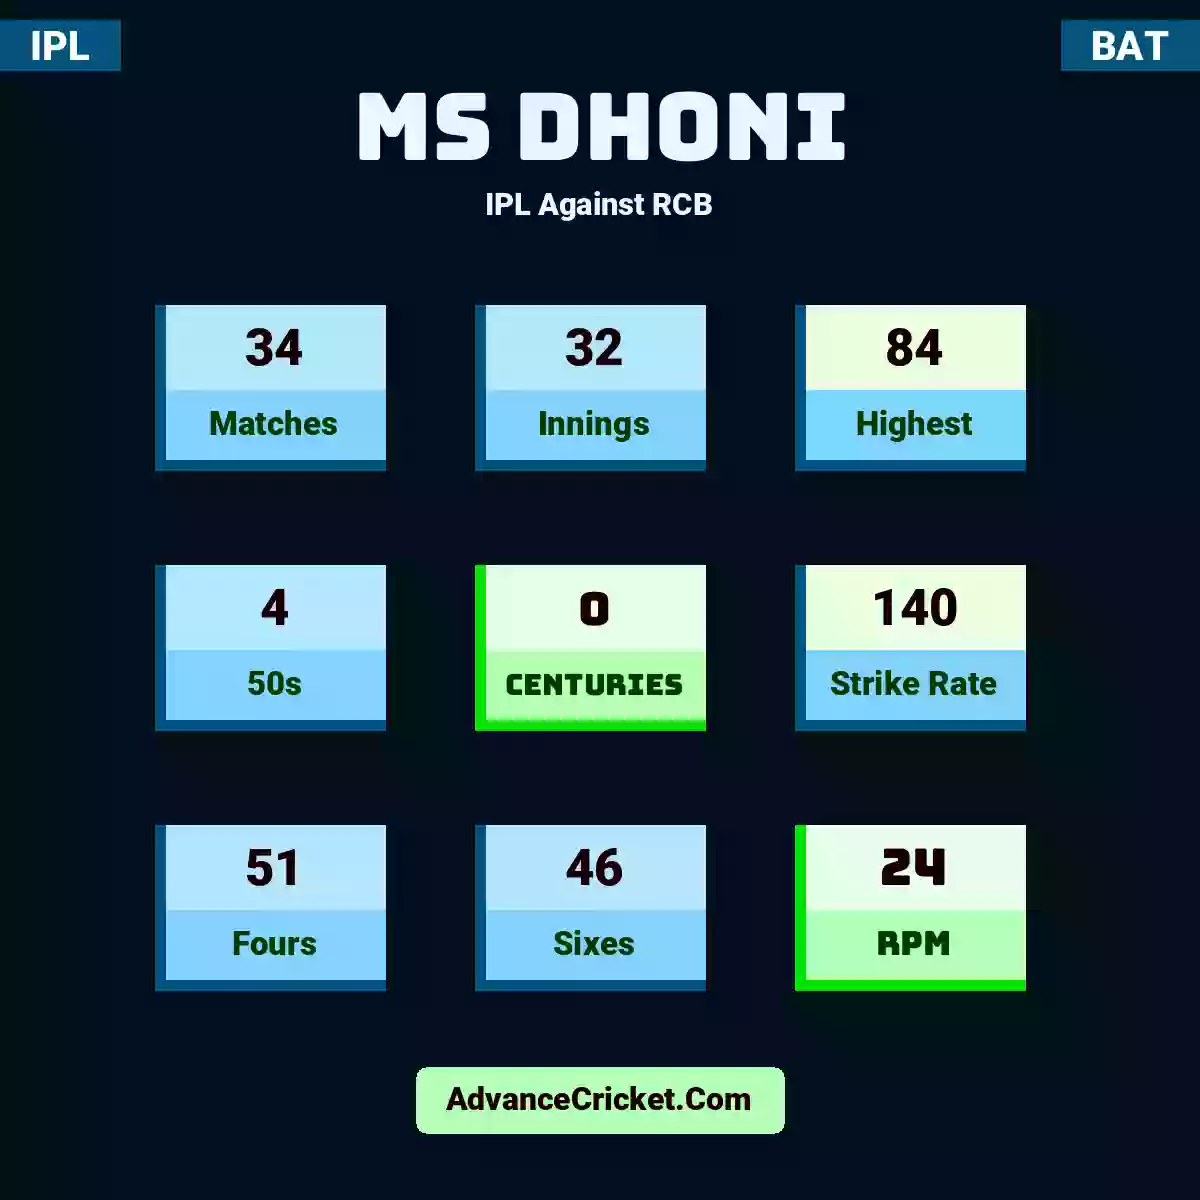 MS Dhoni IPL  Against RCB, MS Dhoni played 34 matches, scored 84 runs as highest, 4 half-centuries, and 0 centuries, with a strike rate of 140. M.Dhoni hit 51 fours and 46 sixes, with an RPM of 24.